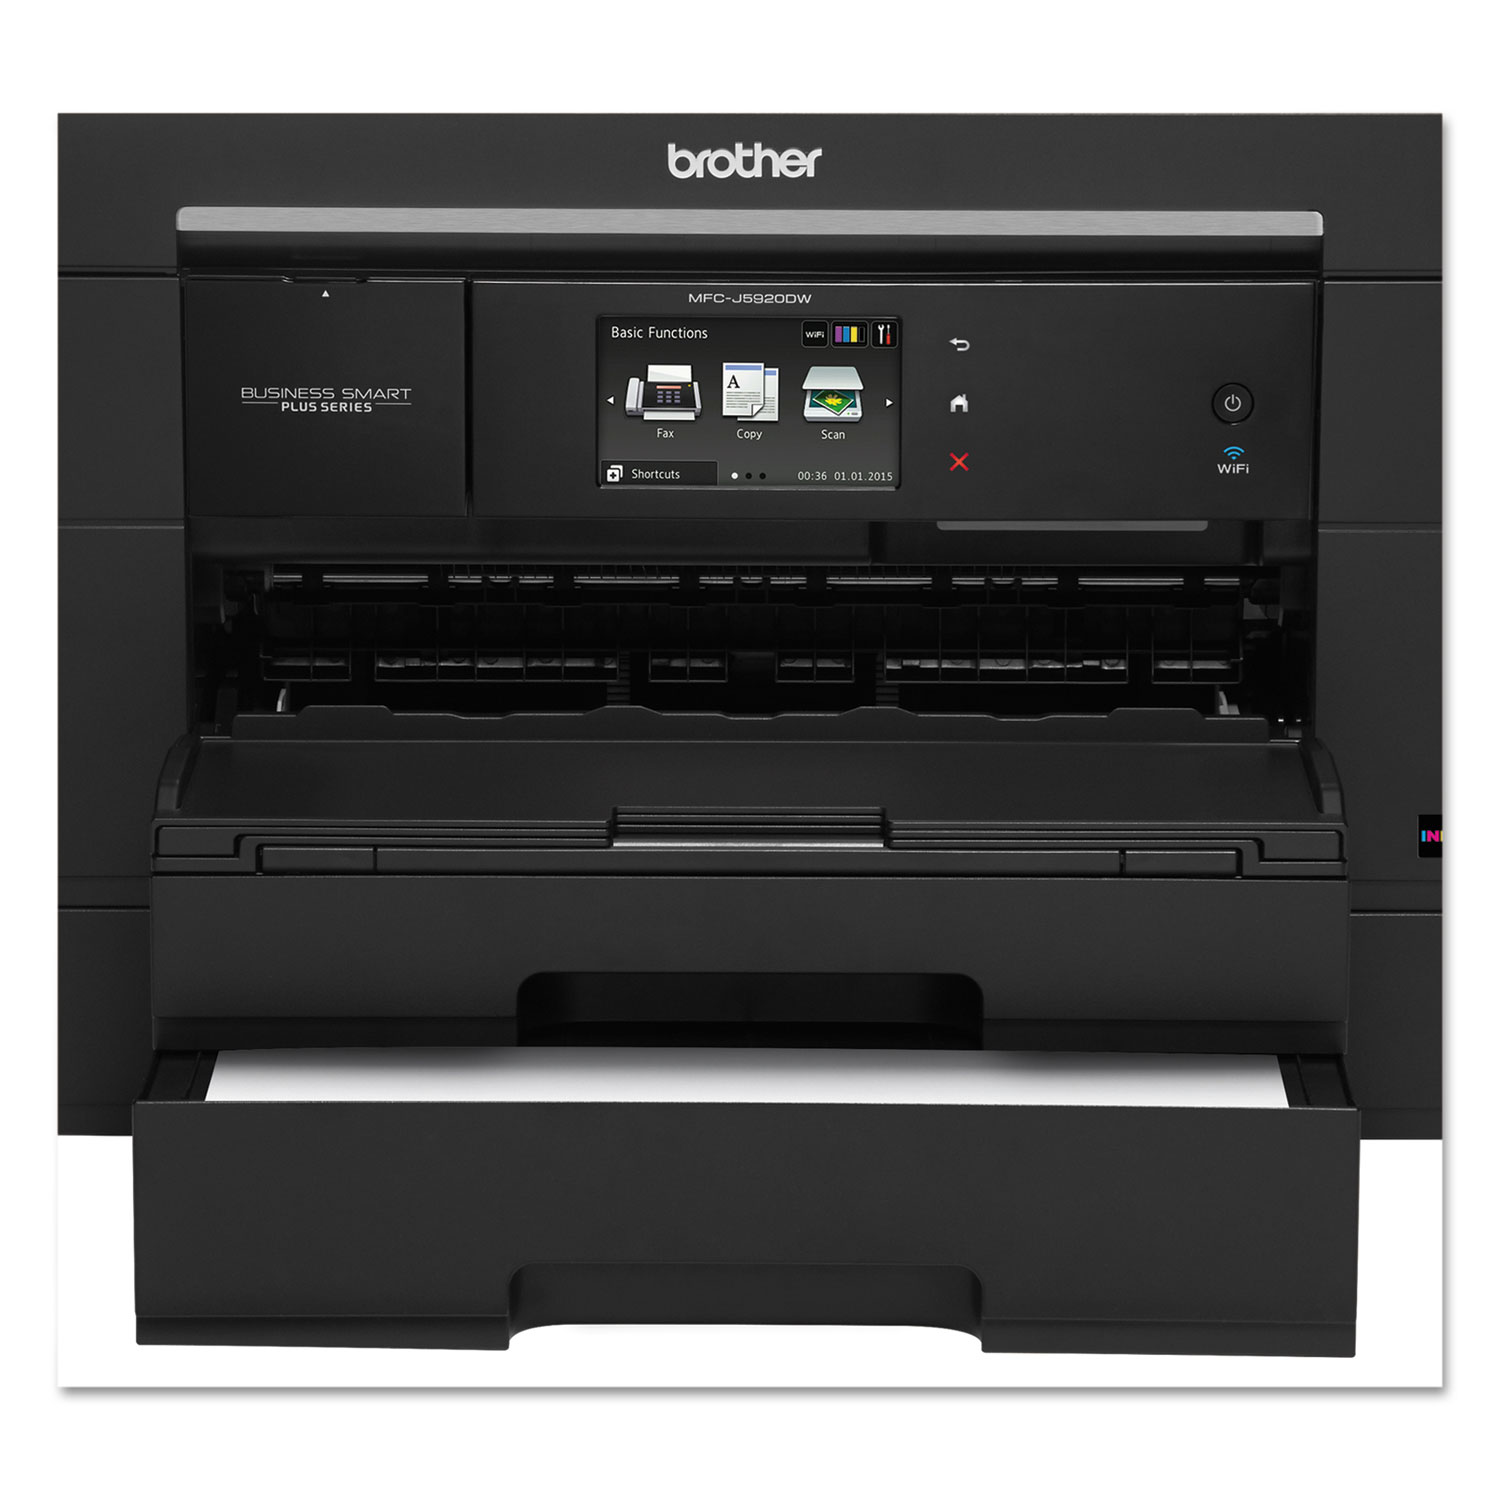 Business Smart Plus MFC-J5920DW Wireless MFP with INKvestment Cartridges